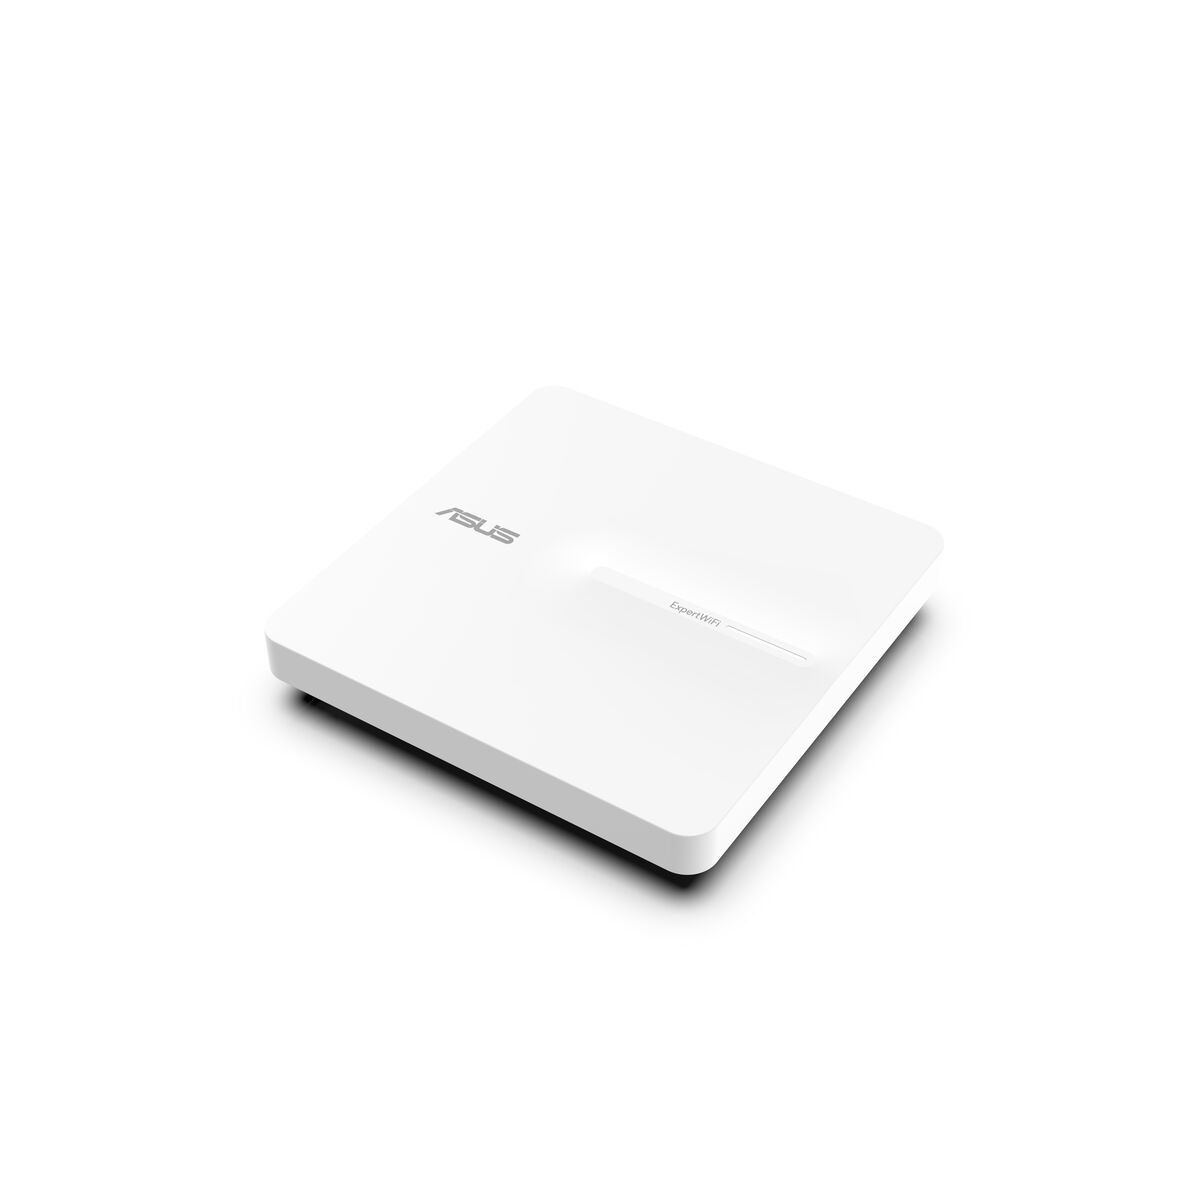 Access point Asus EBA63 ExpertWiFi AX3000 White, Asus, Computing, Network devices, access-point-asus-eba63-expertwifi-ax3000-white, Brand_Asus, category-reference-2609, category-reference-2803, category-reference-2820, category-reference-t-19685, category-reference-t-19914, category-reference-t-21369, Condition_NEW, networks/wiring, Price_100 - 200, Teleworking, RiotNook